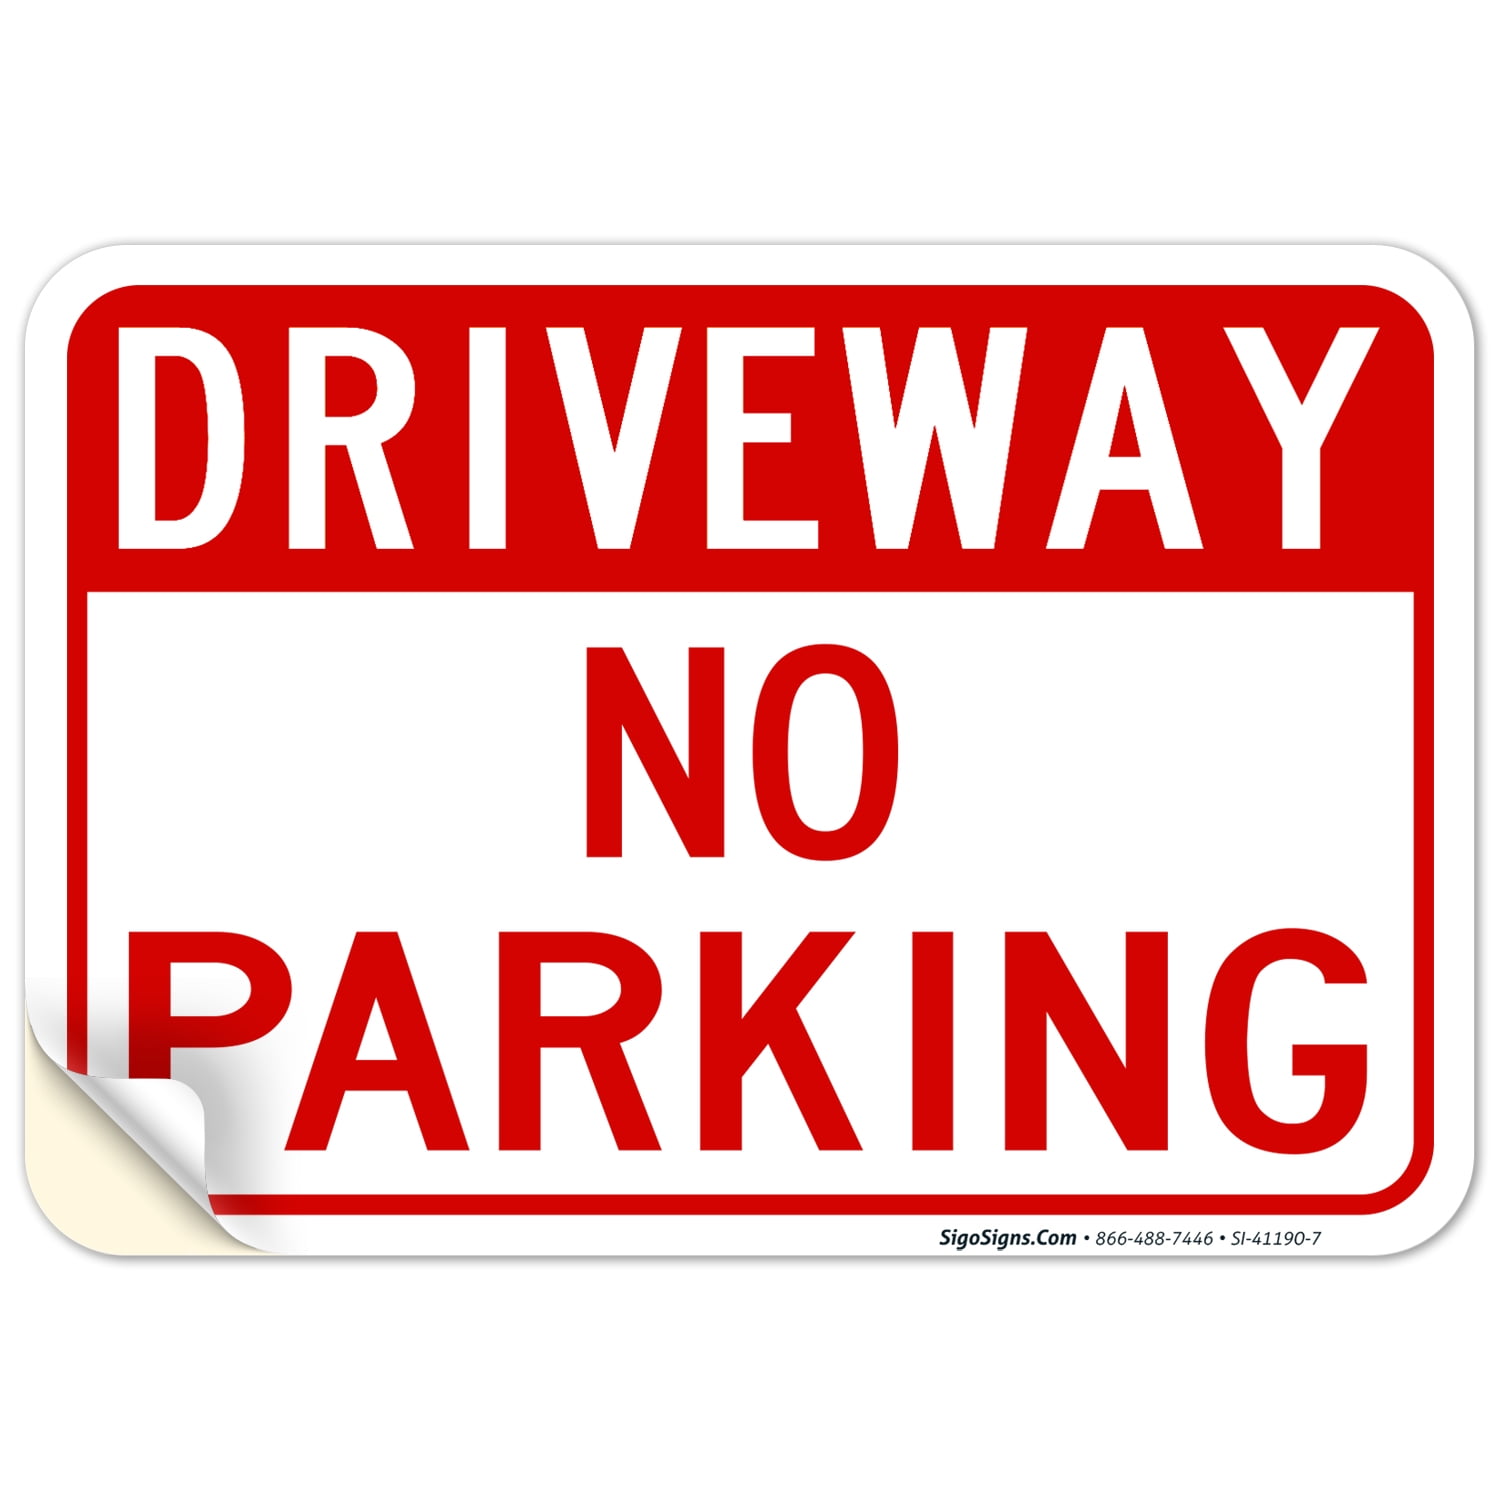 NO PARKING IN DRIVEWAY Parking Signs 